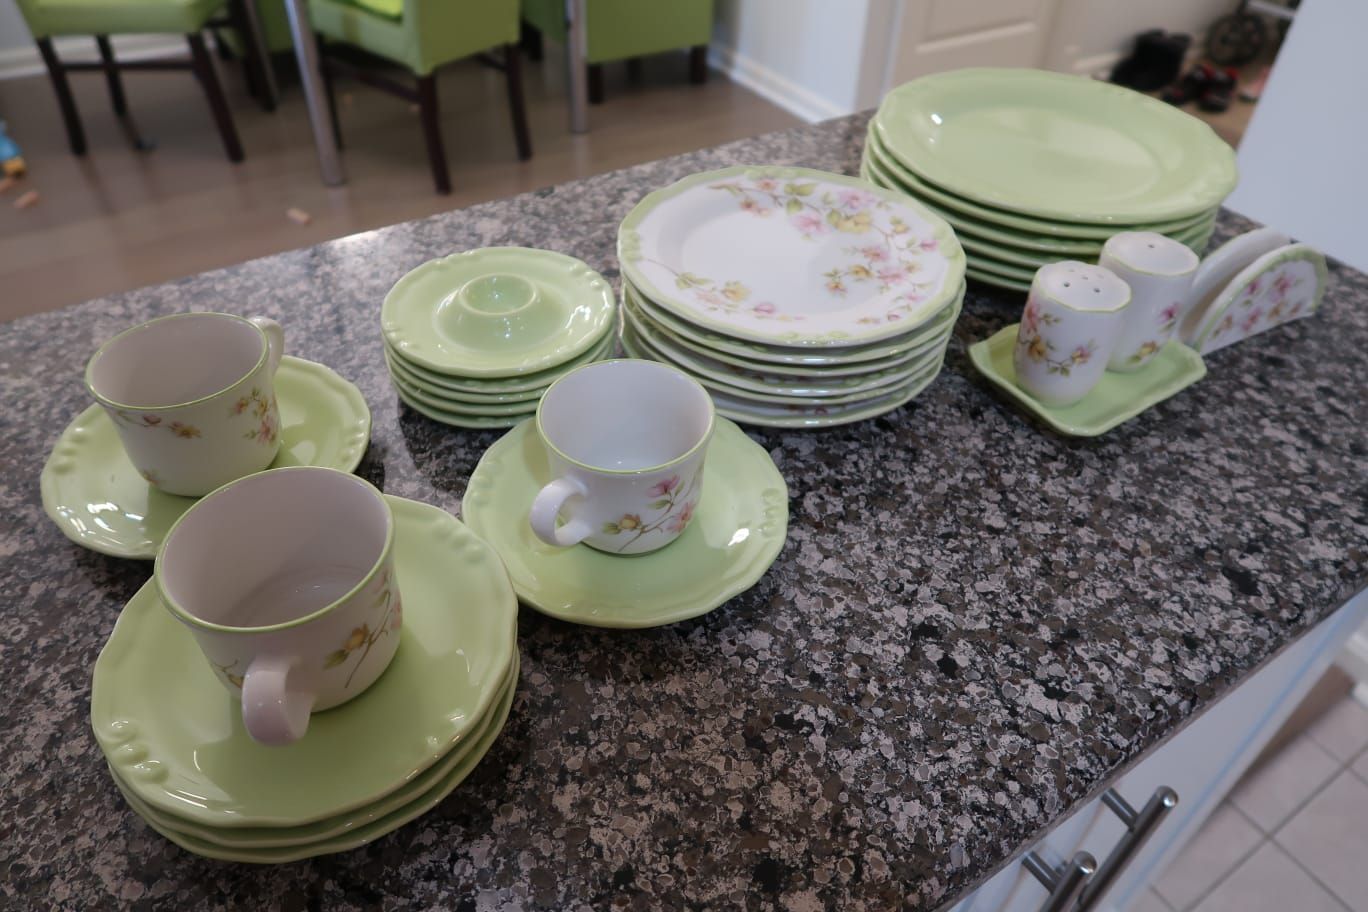 Breakfast plate and cups set